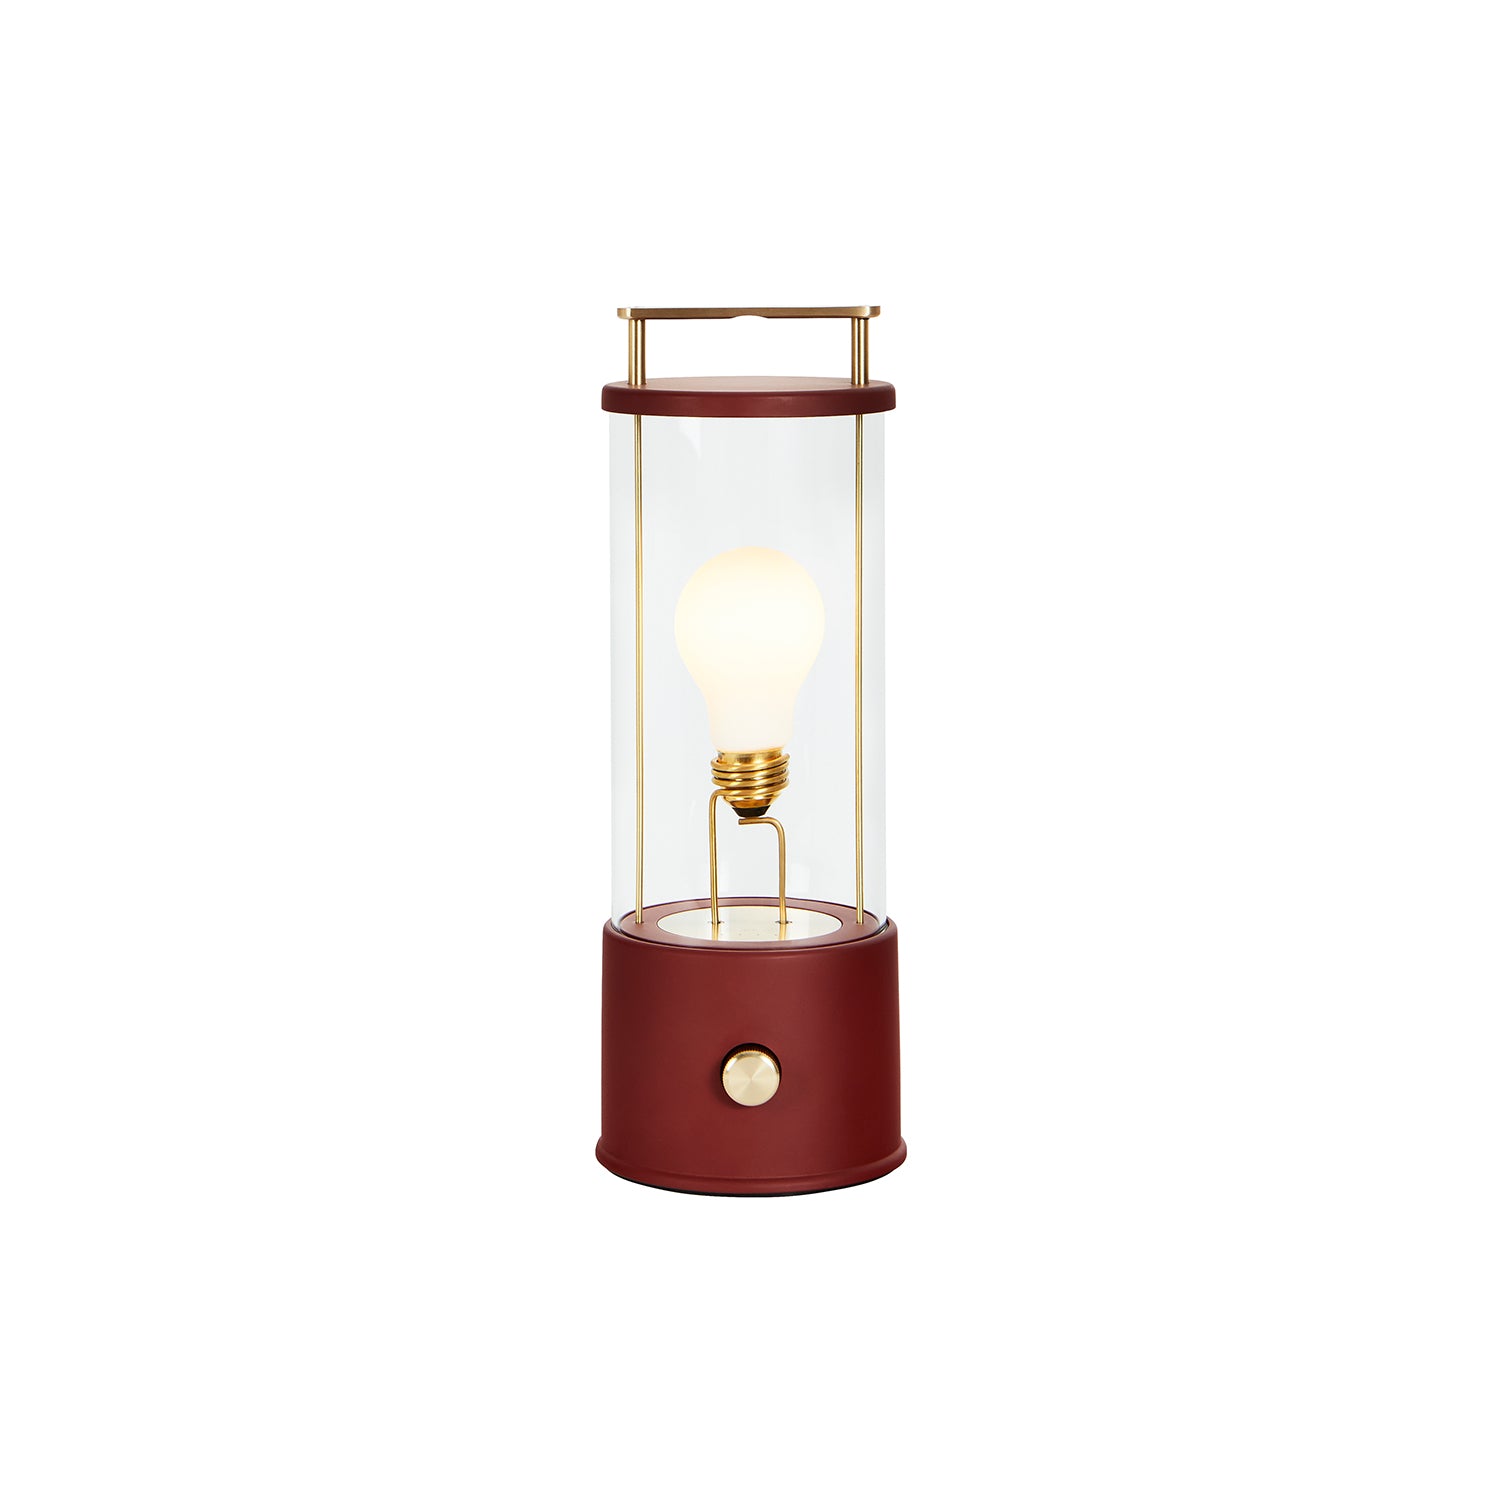 The Muse Portable Table Lamp: Pomona Red